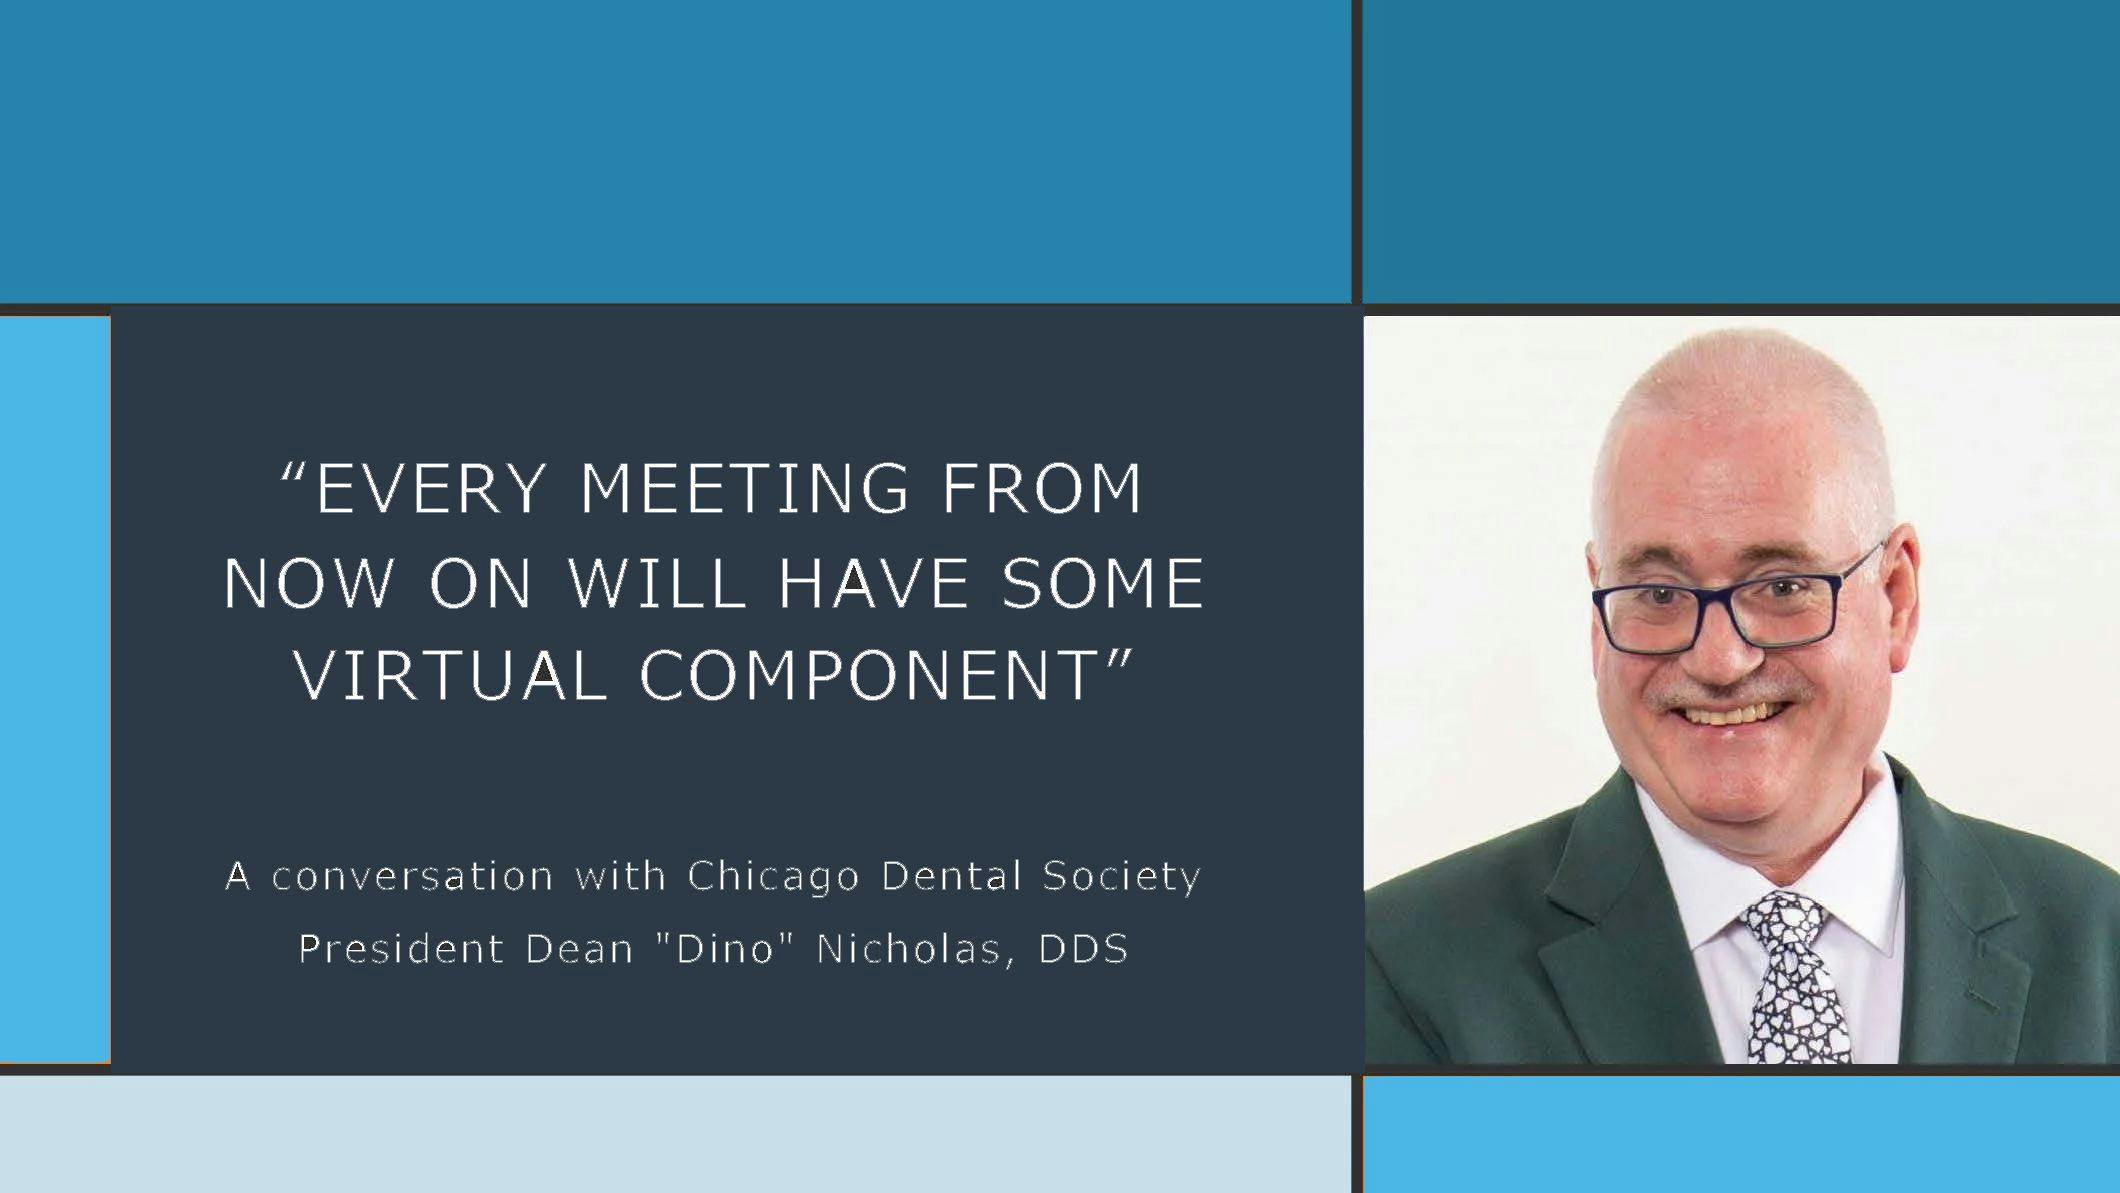 Every Meeting From Now On Will Have Some Virtual Component: A conversation with Chicago Dental Society President Dean "Dino" Nicholas, DDS